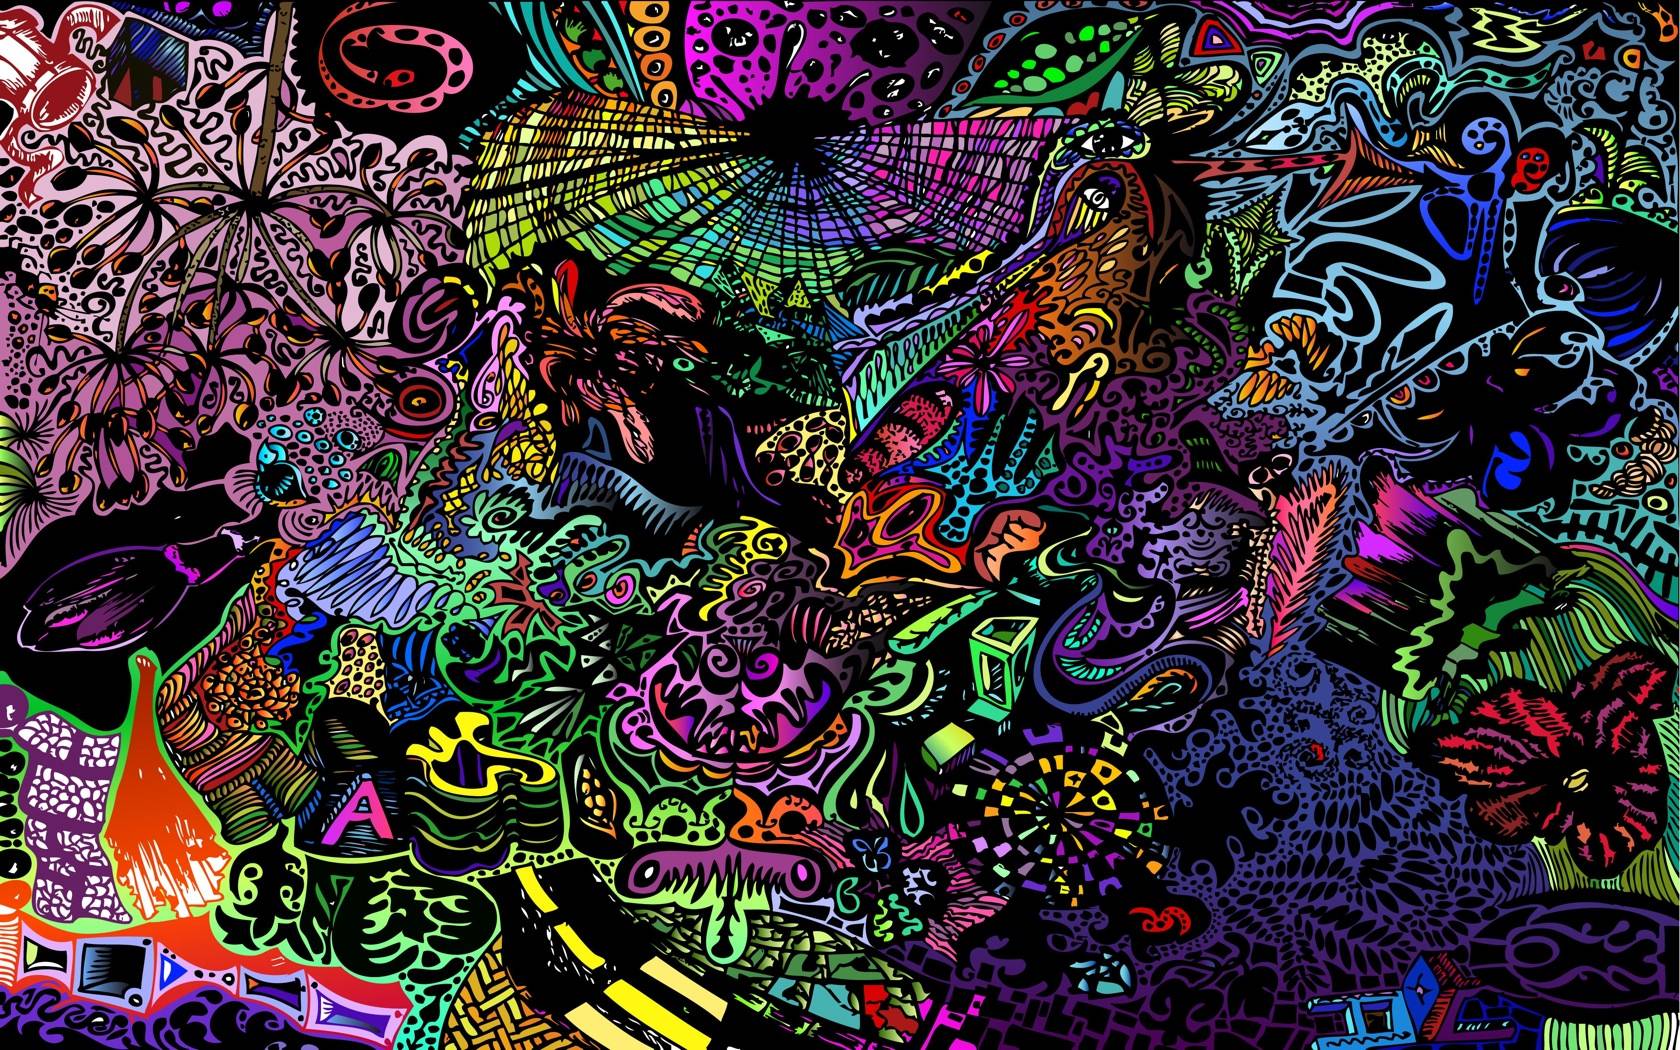 Trippy Android Wallpapers - Desktopwallpapers.